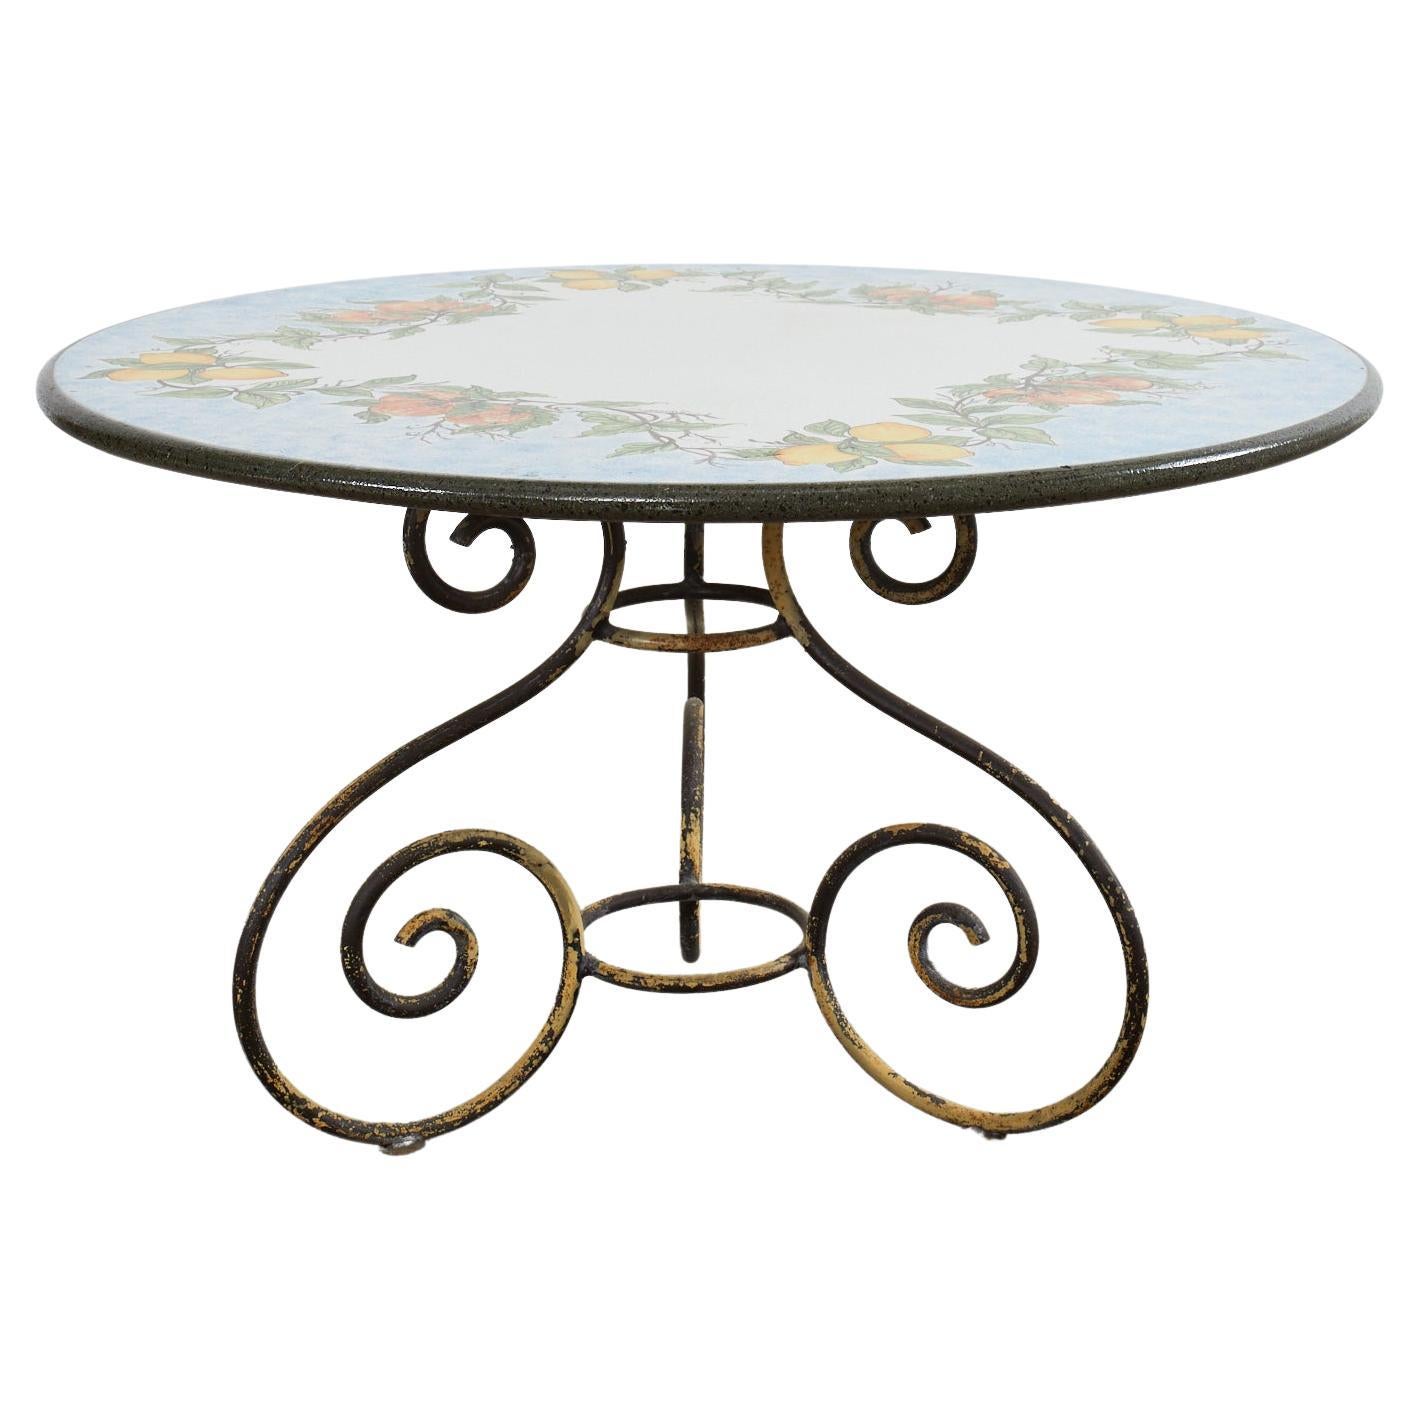 Italian Amalfi Style Glazed Stone and Iron Painted Garden Table For Sale